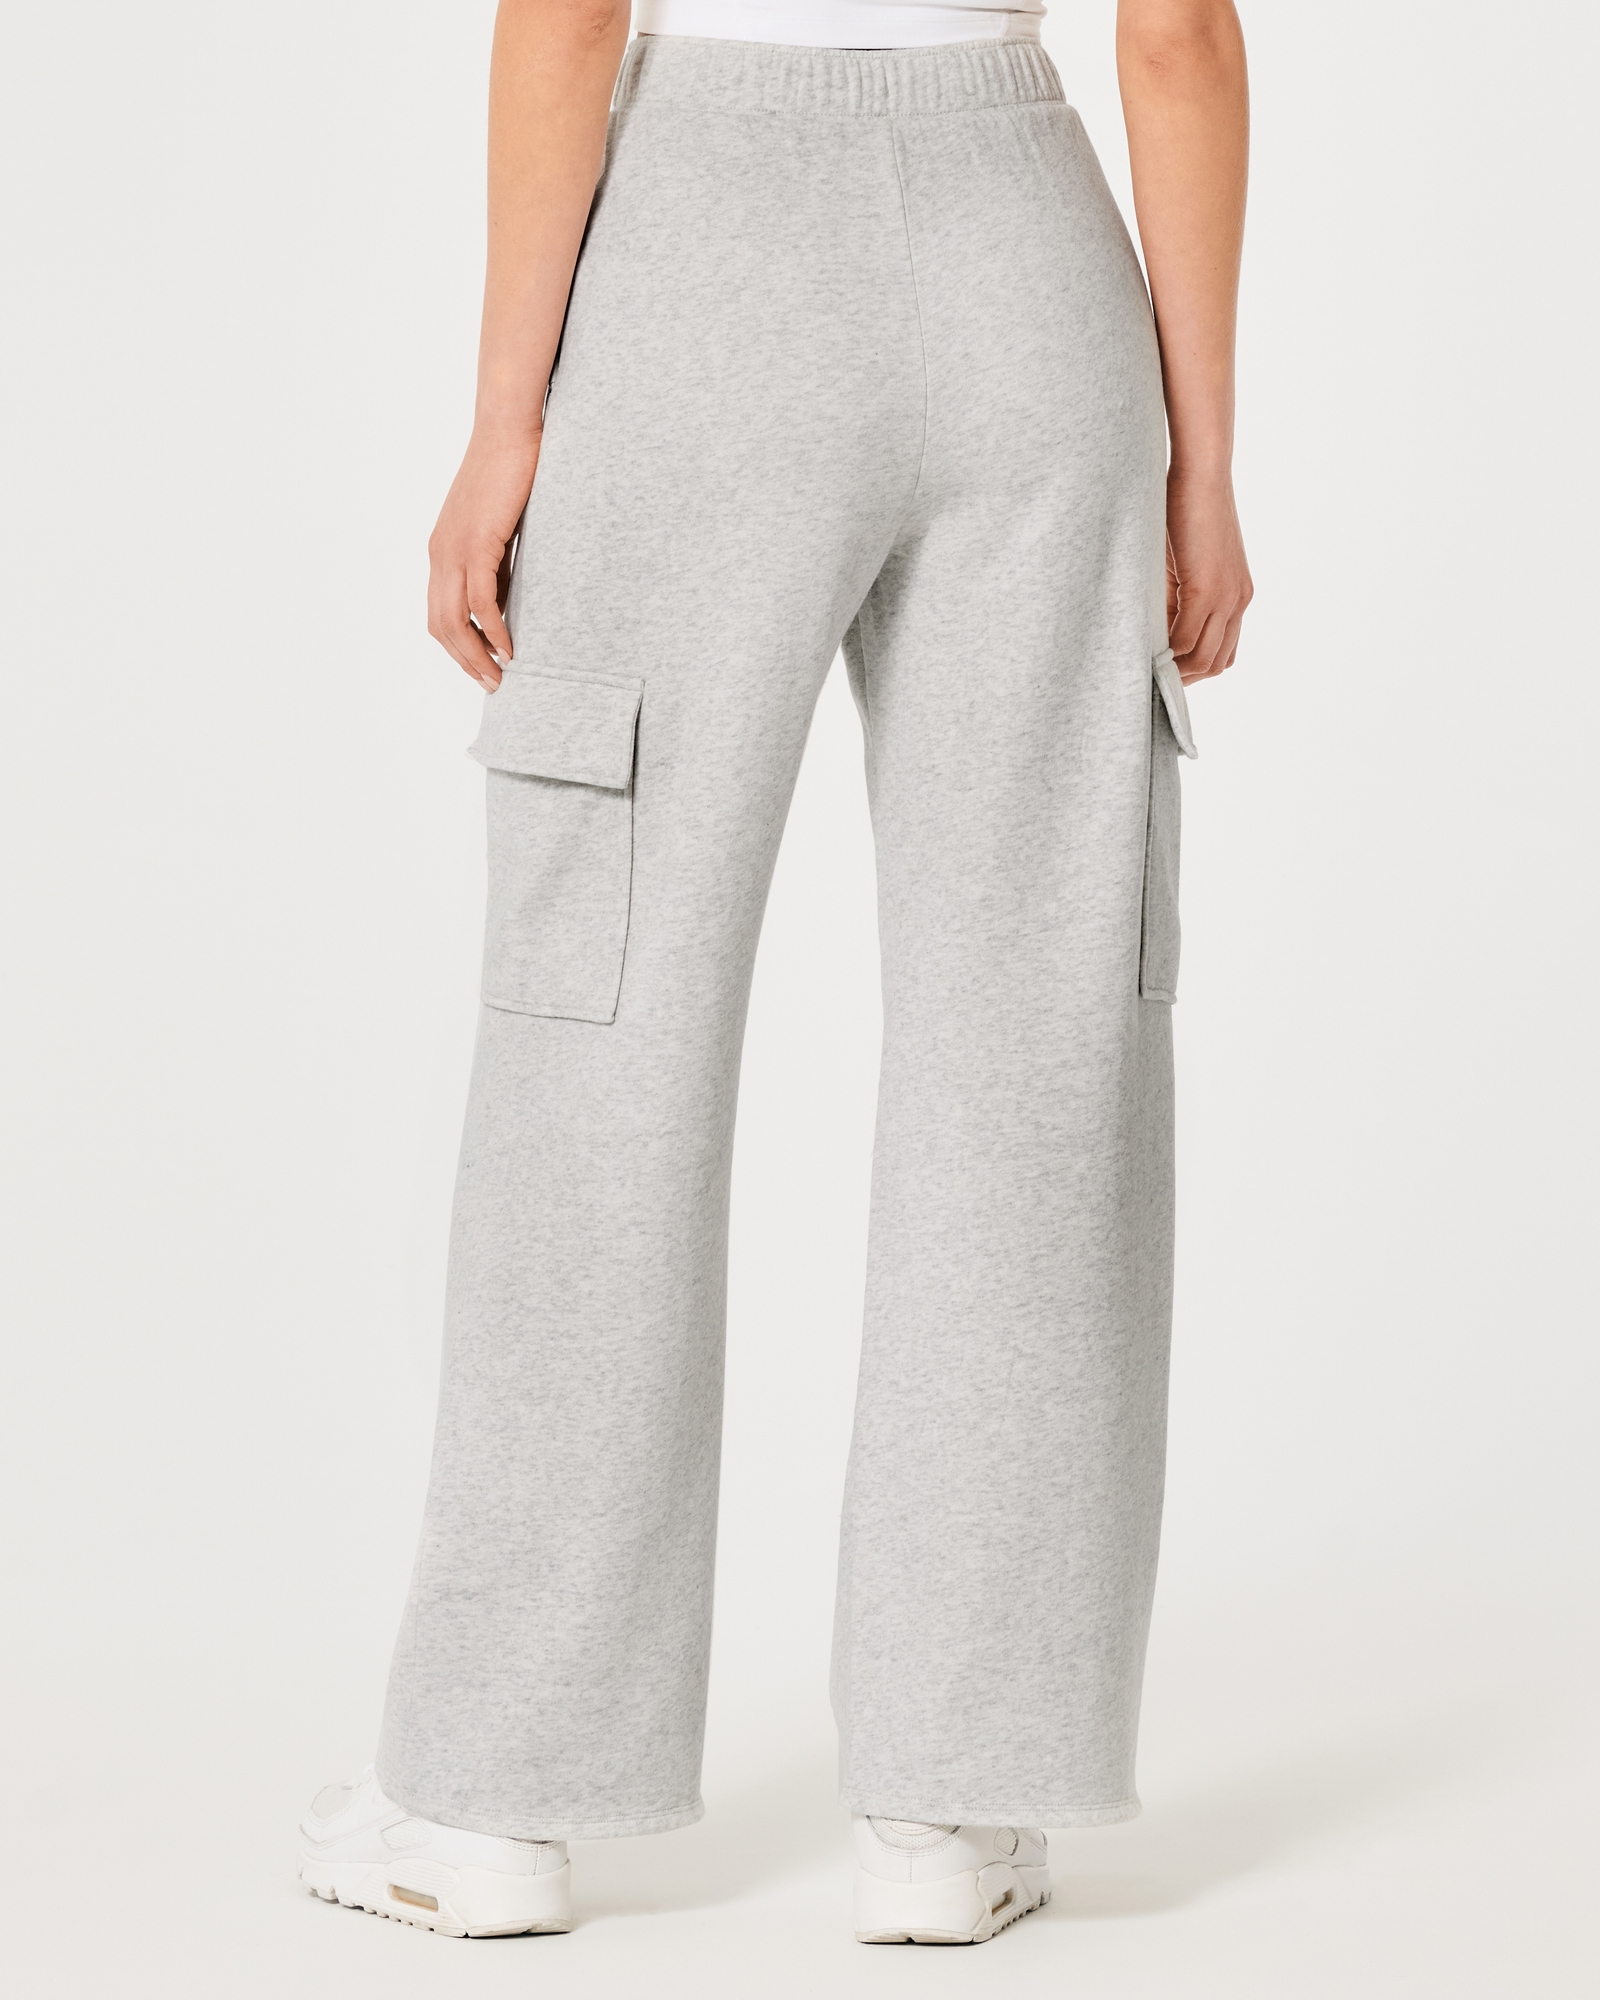 Hollister Sweatpants Gray Size M - $13 (56% Off Retail) - From Liv